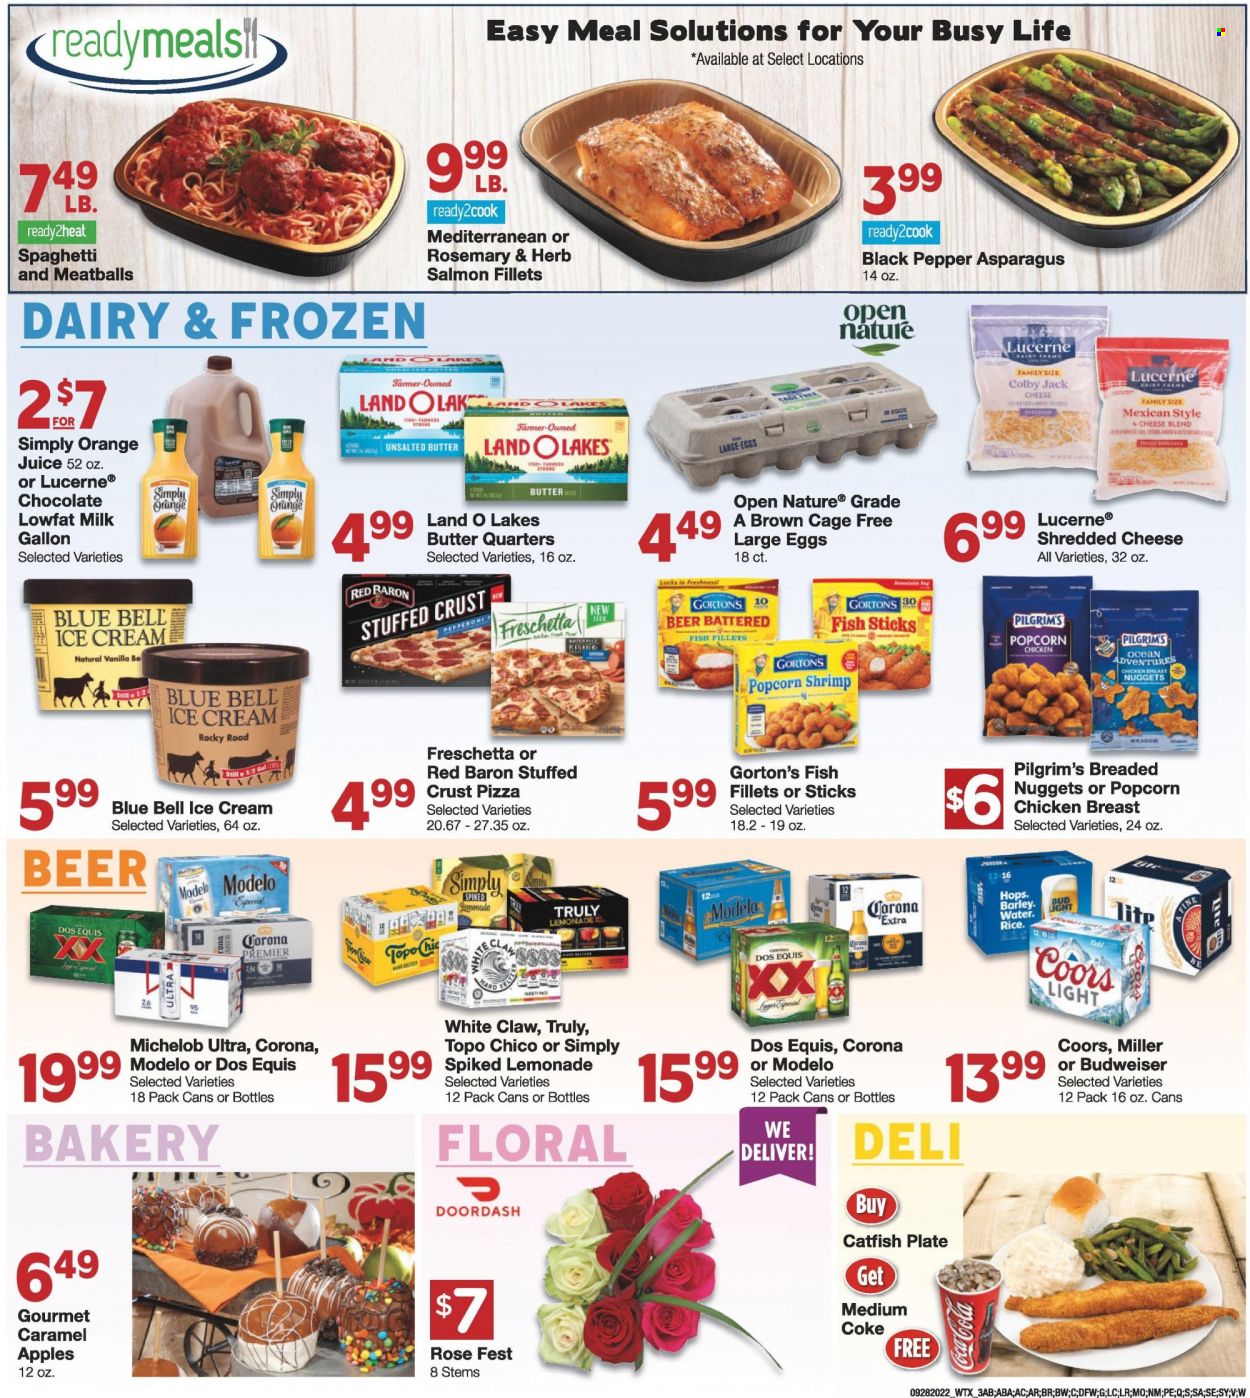 thumbnail - United Supermarkets Flyer - 09/28/2022 - 10/04/2022 - Sales products - asparagus, apples, catfish, fish fillets, salmon, salmon fillet, fish, shrimps, fish fingers, Gorton's, fish sticks, spaghetti, pizza, meatballs, nuggets, chicken nuggets, pepperoni, Colby cheese, shredded cheese, milk, cage free eggs, large eggs, ice cream, Blue Bell, Red Baron, rosemary, black pepper, caramel, Coca-Cola, lemonade, orange juice, juice, rosé wine, White Claw, TRULY, beer, Bud Light, Corona Extra, Miller, Lager, Modelo, plate, Budweiser, Coors, Dos Equis, Michelob. Page 3.